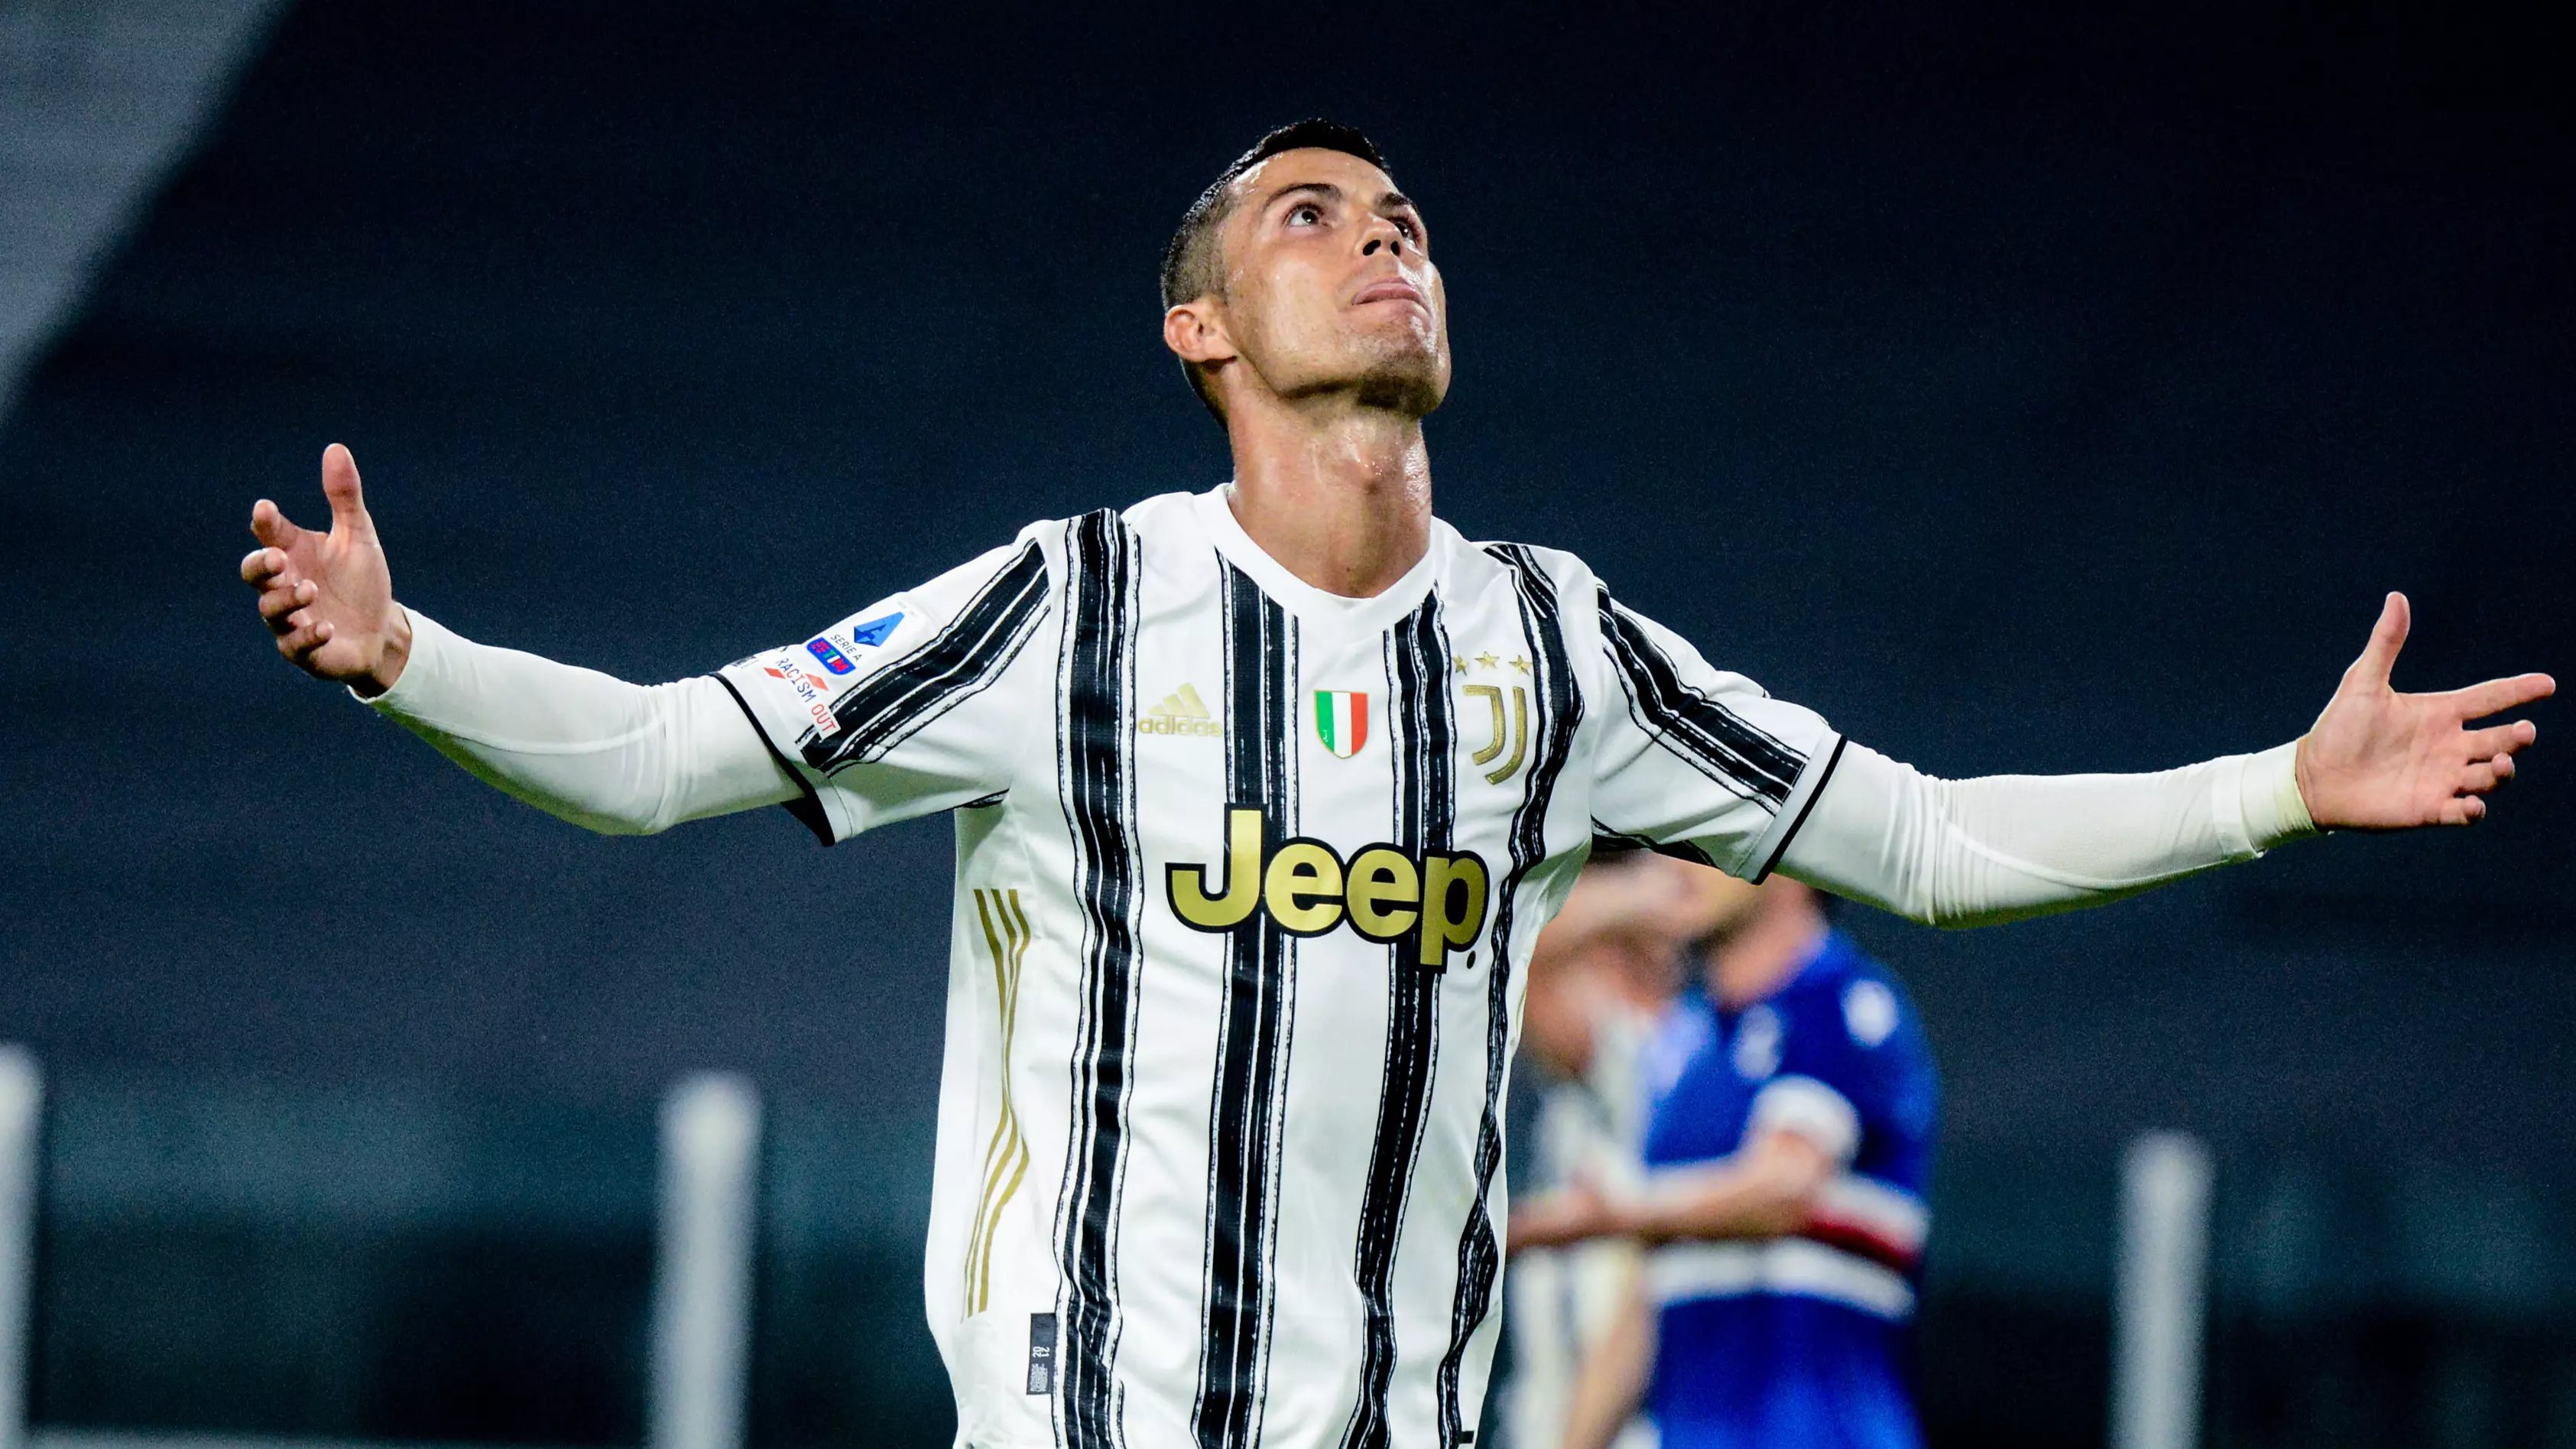 Cristiano Ronaldo Is Only The Ninth Most Valuable Player In Serie A According To Study